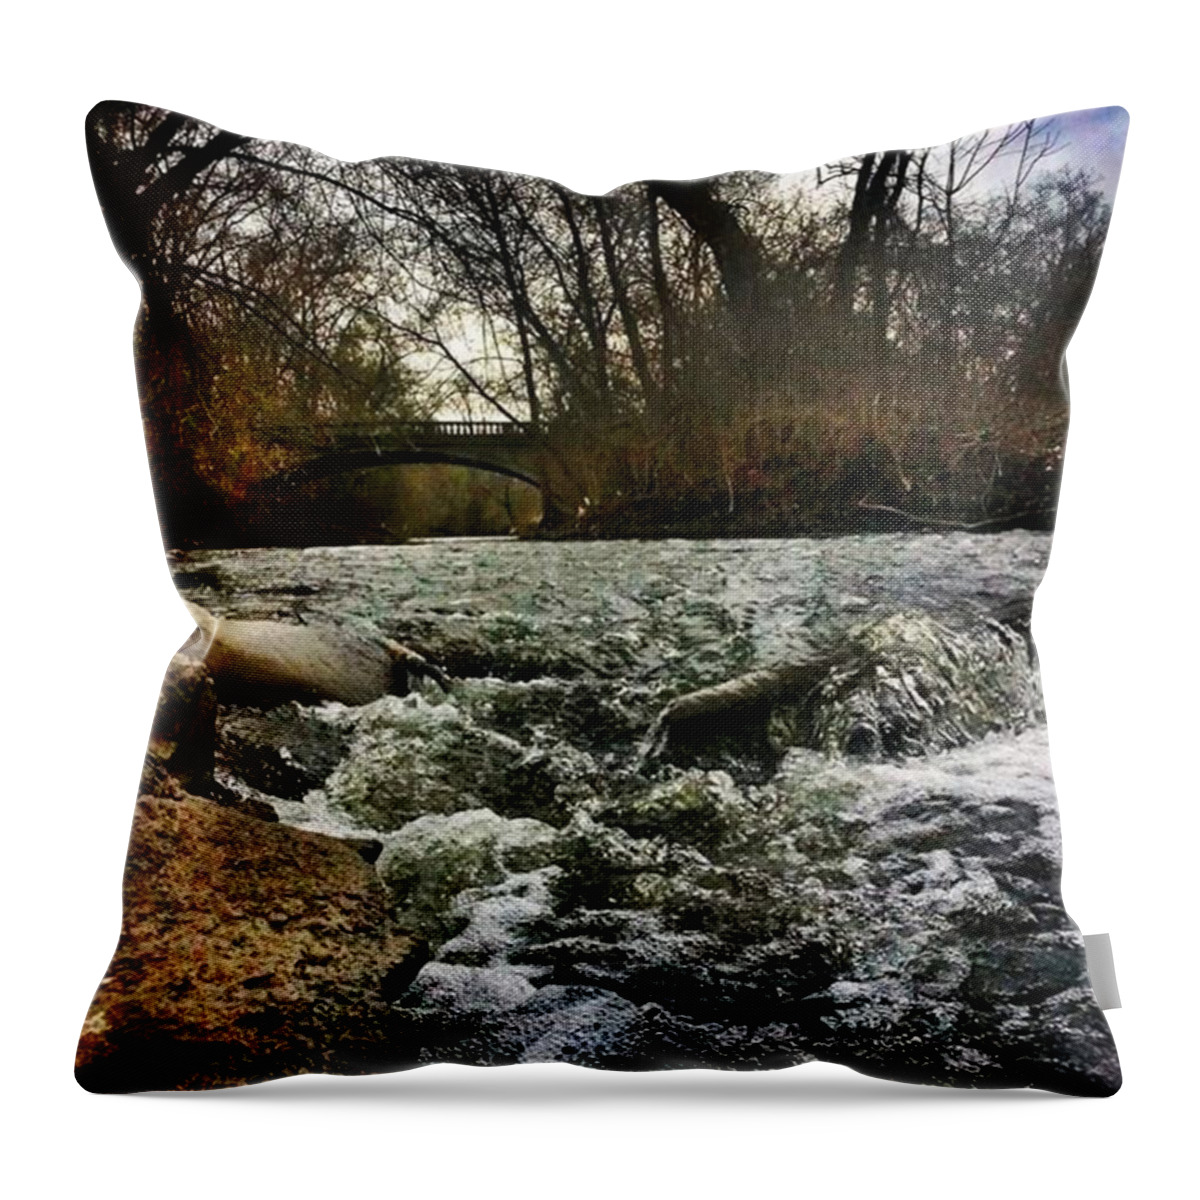  Throw Pillow featuring the photograph Rolling On The River by Robert Carey